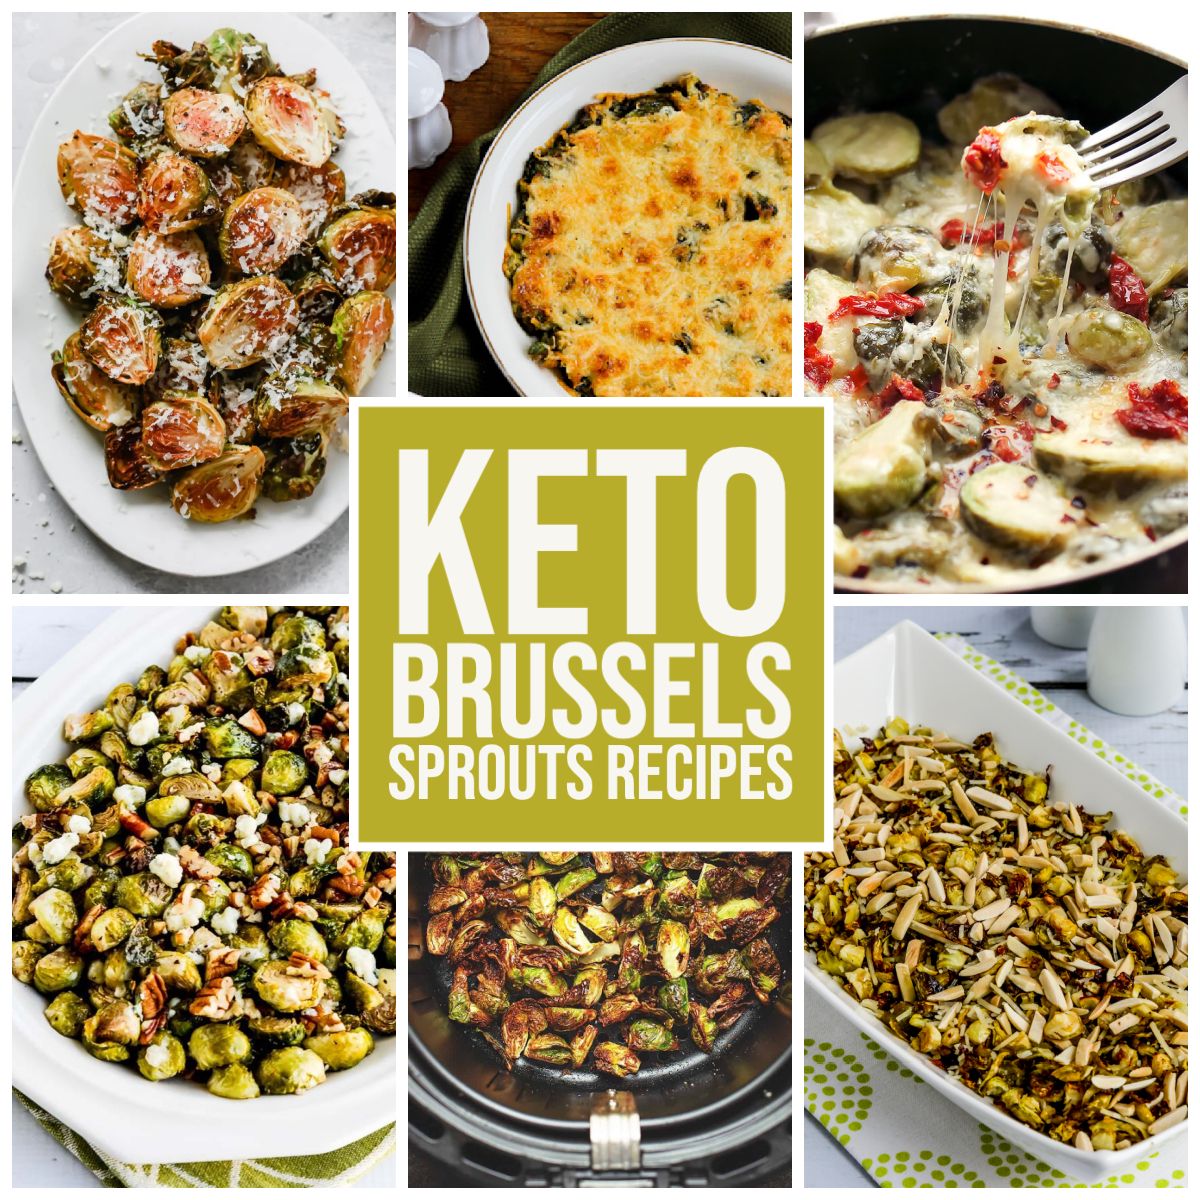 Keto Brussels Sprouts Recipes collage with text overlay